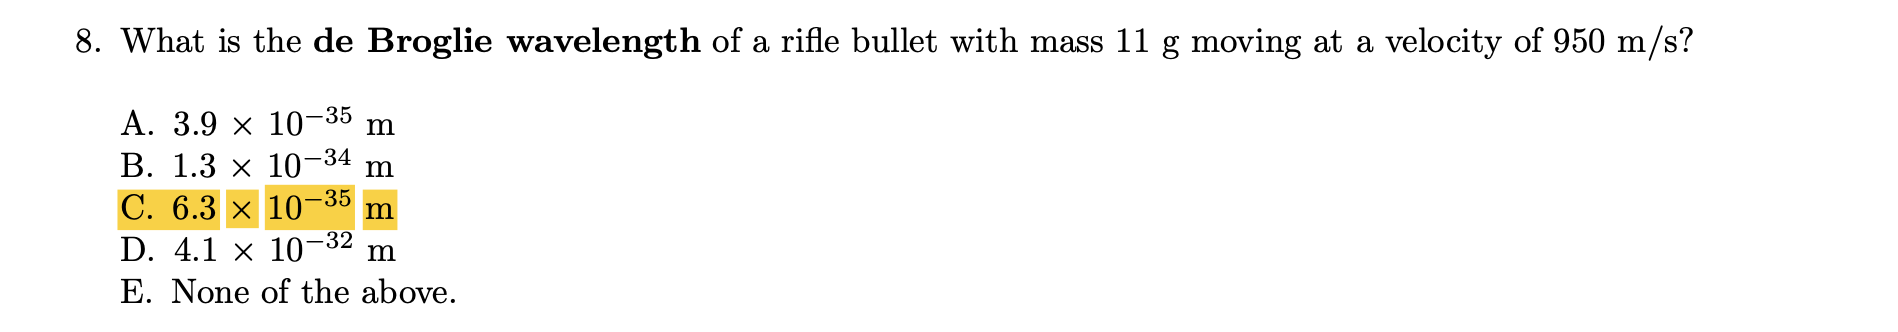 8. What is the de Broglie wavelength of a rifle bullet with mass 11 g moving at a velocity of 950 m/s?
-35
А. 3.9 х 10-
В. 1.3 х 10-34
C. 6.3 x 10-
D. 4.1 × 10-32
E. None of the above.
m
-35
m
